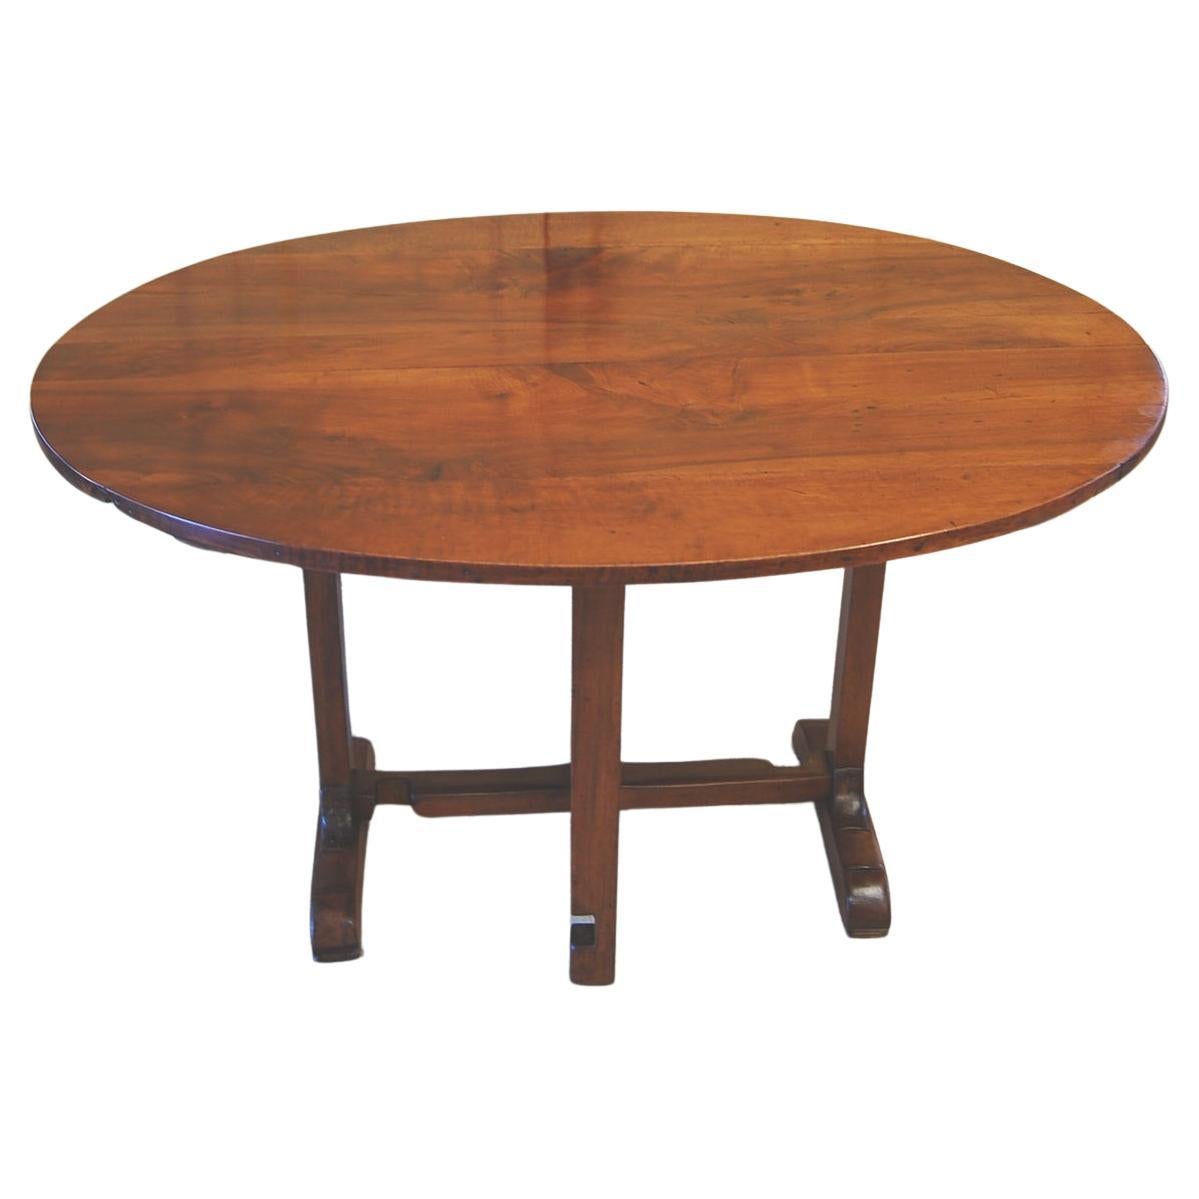 French  Mid 19th Century Oval Walnut Vendange Table with Tilting Mechanism